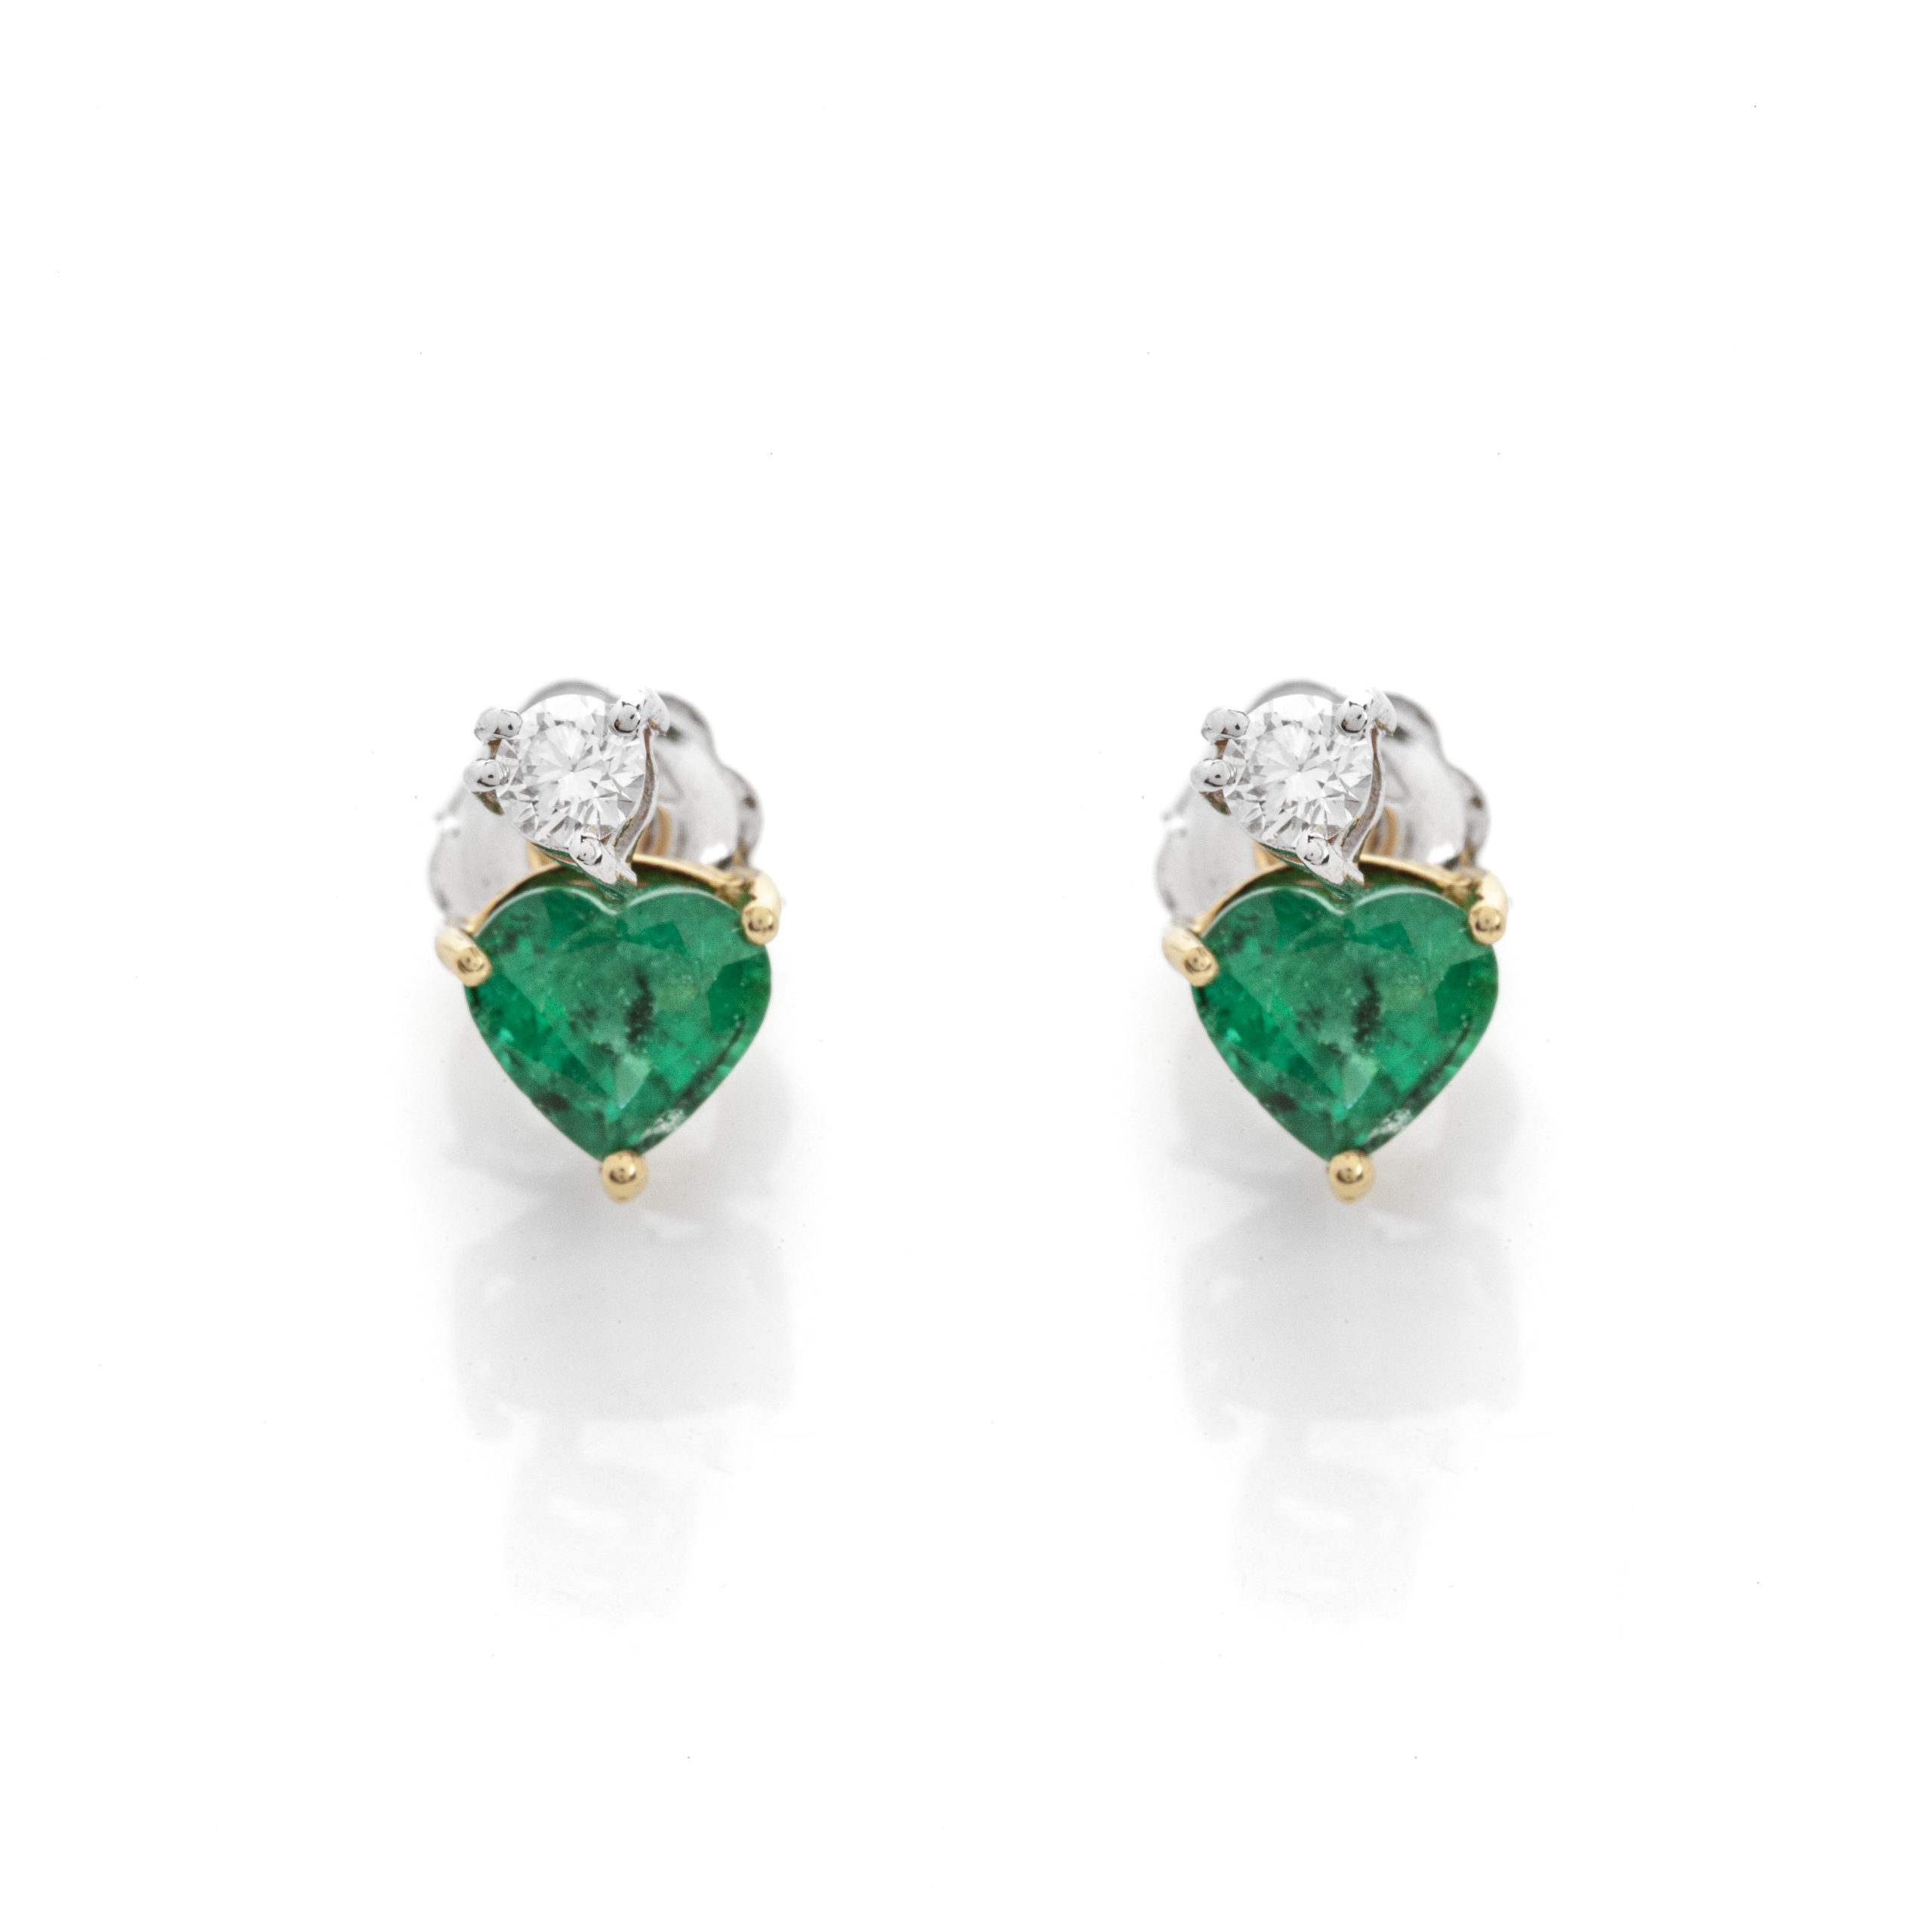 White Gold Earrings with Emerald and Brilliant